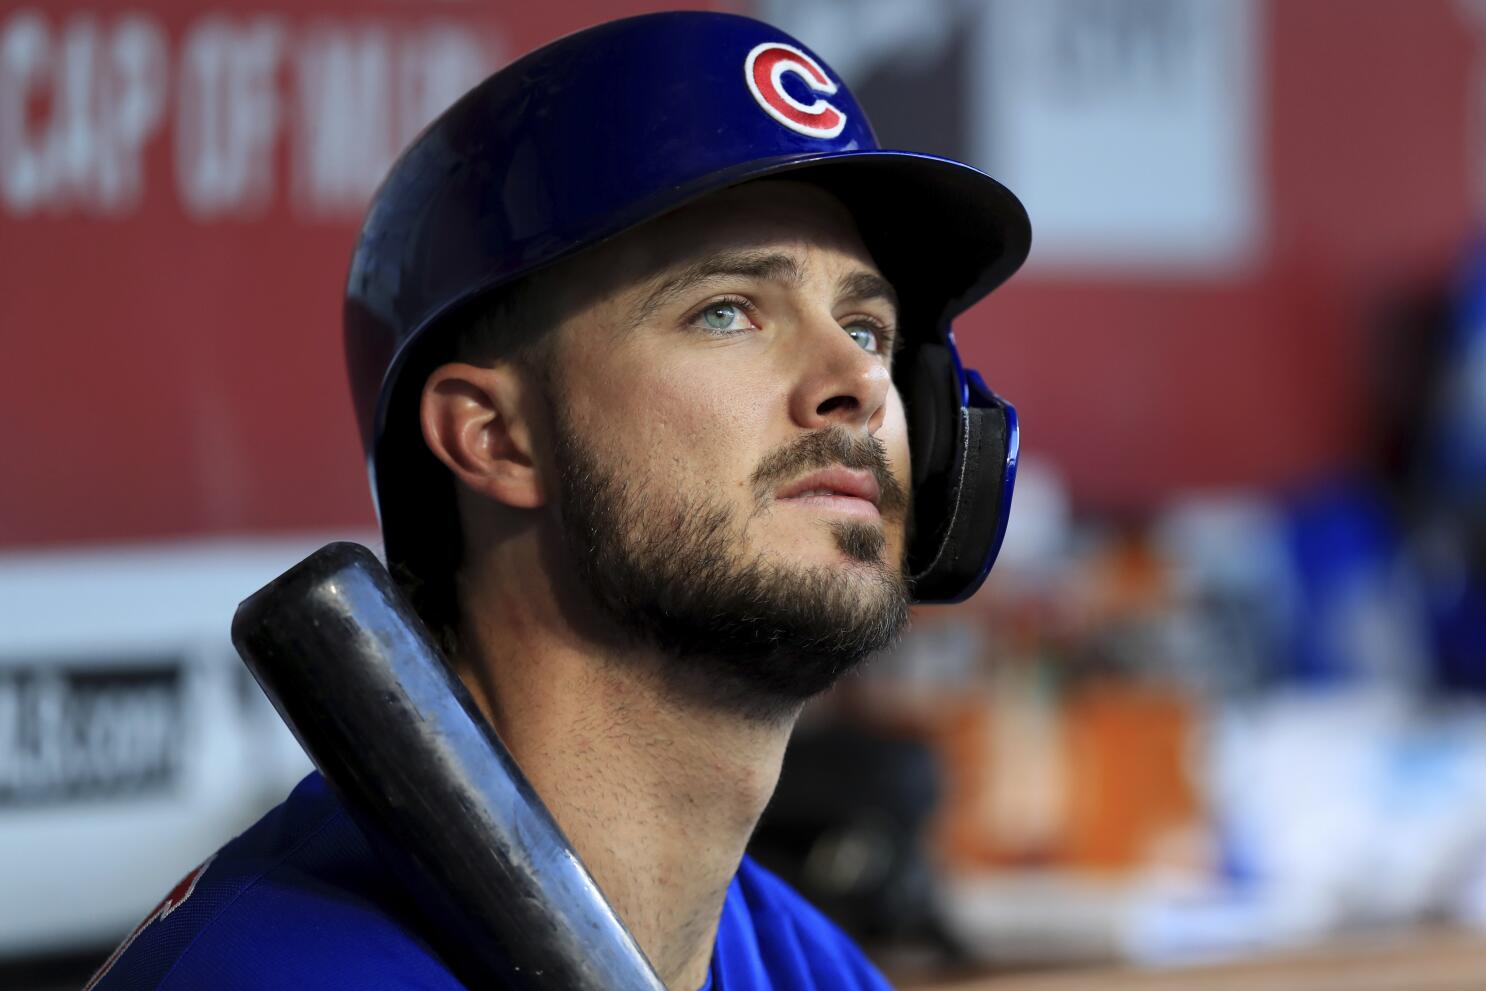 Here's how various projection systems see the 2023 Chicago Cubs